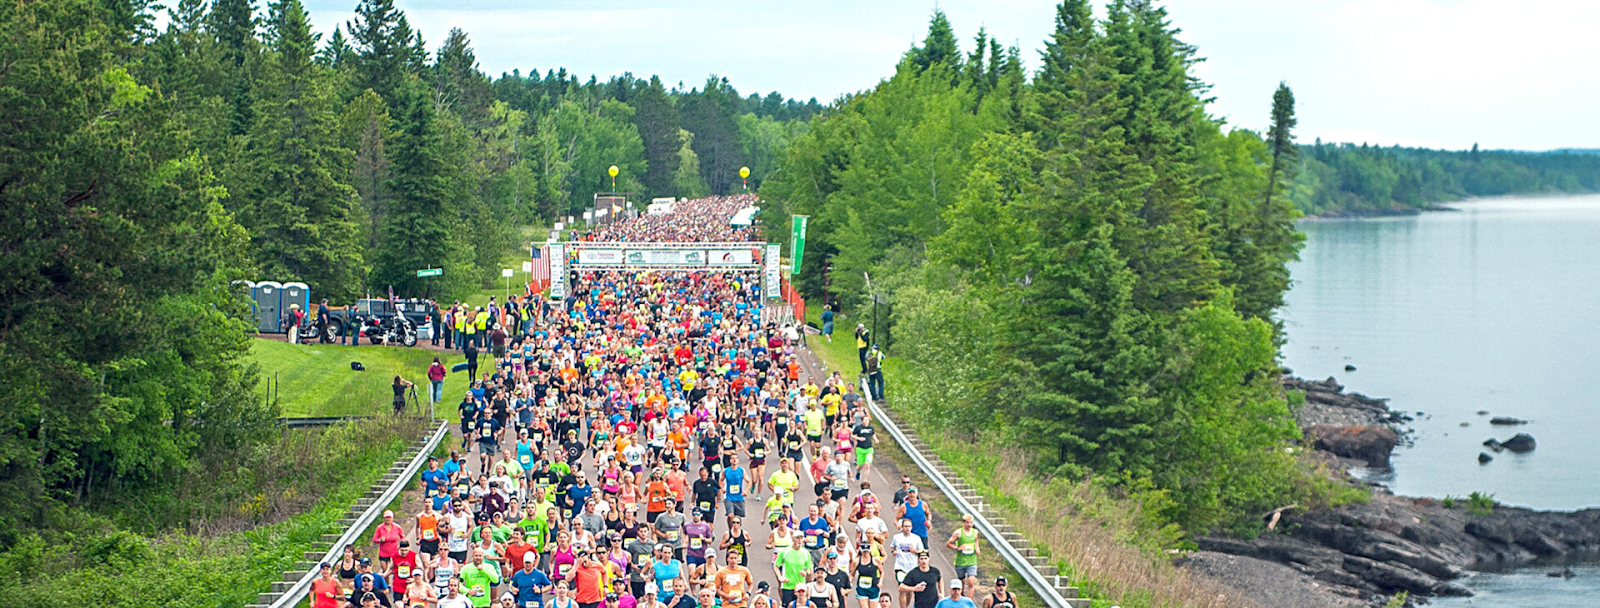 Grandma's Marathon in Duluth because of its crowds and course make it one of the best marathons for beginners.